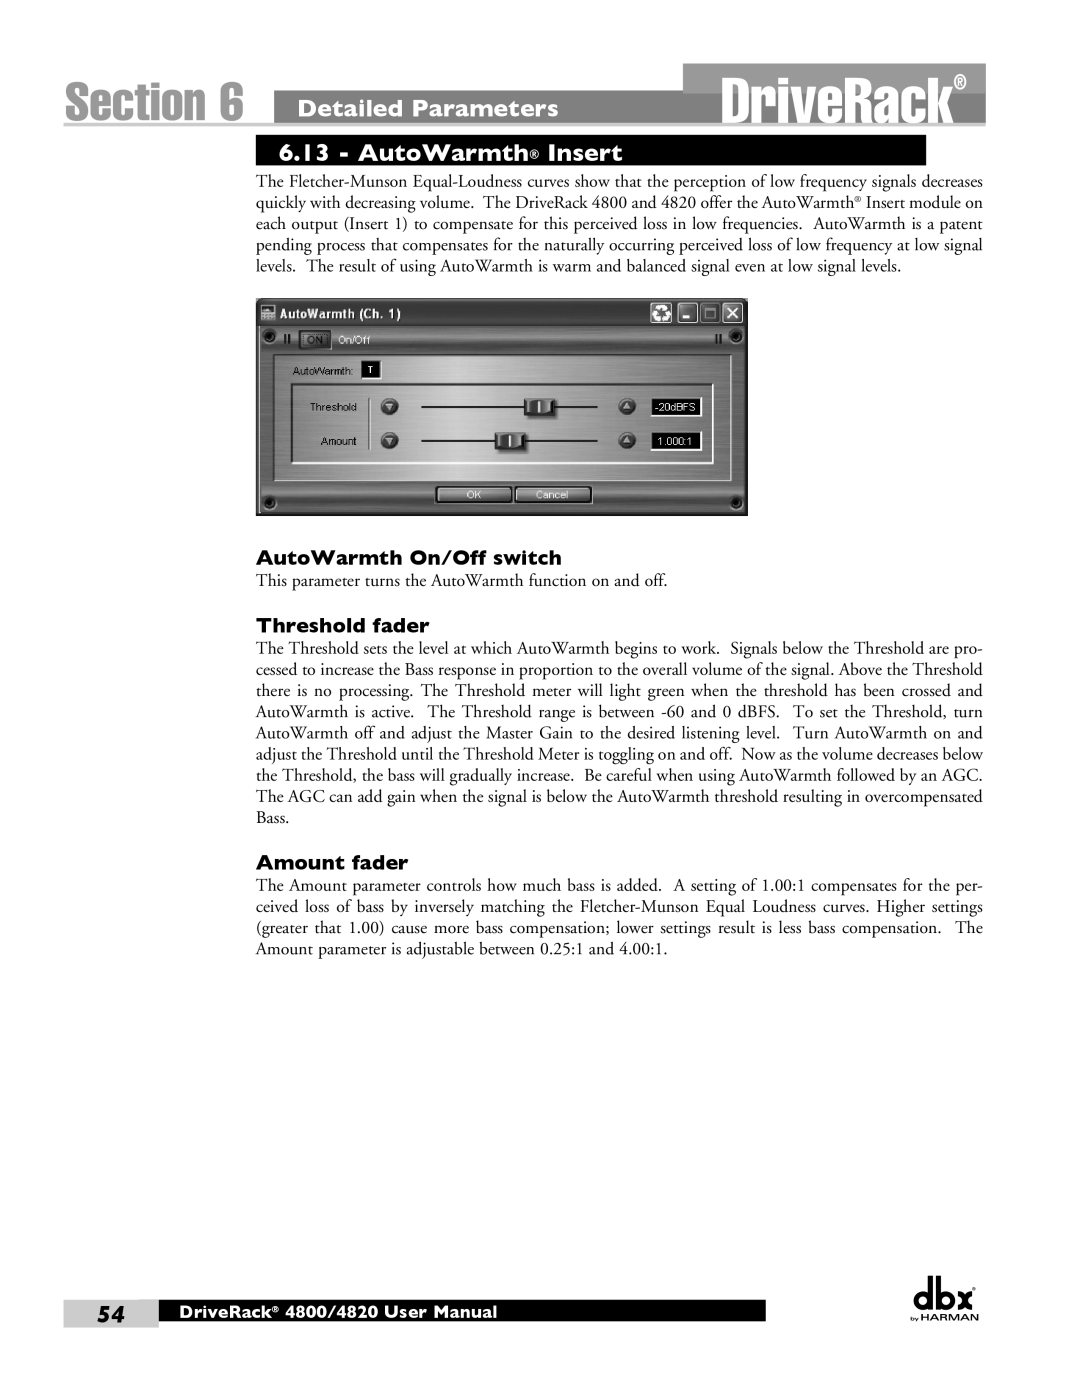 Harman 4800, 4820 AutoWarmth Insert, DriveRack, Section, Detailed Parameters, AutoWarmth On/Off switch, Threshold fader 